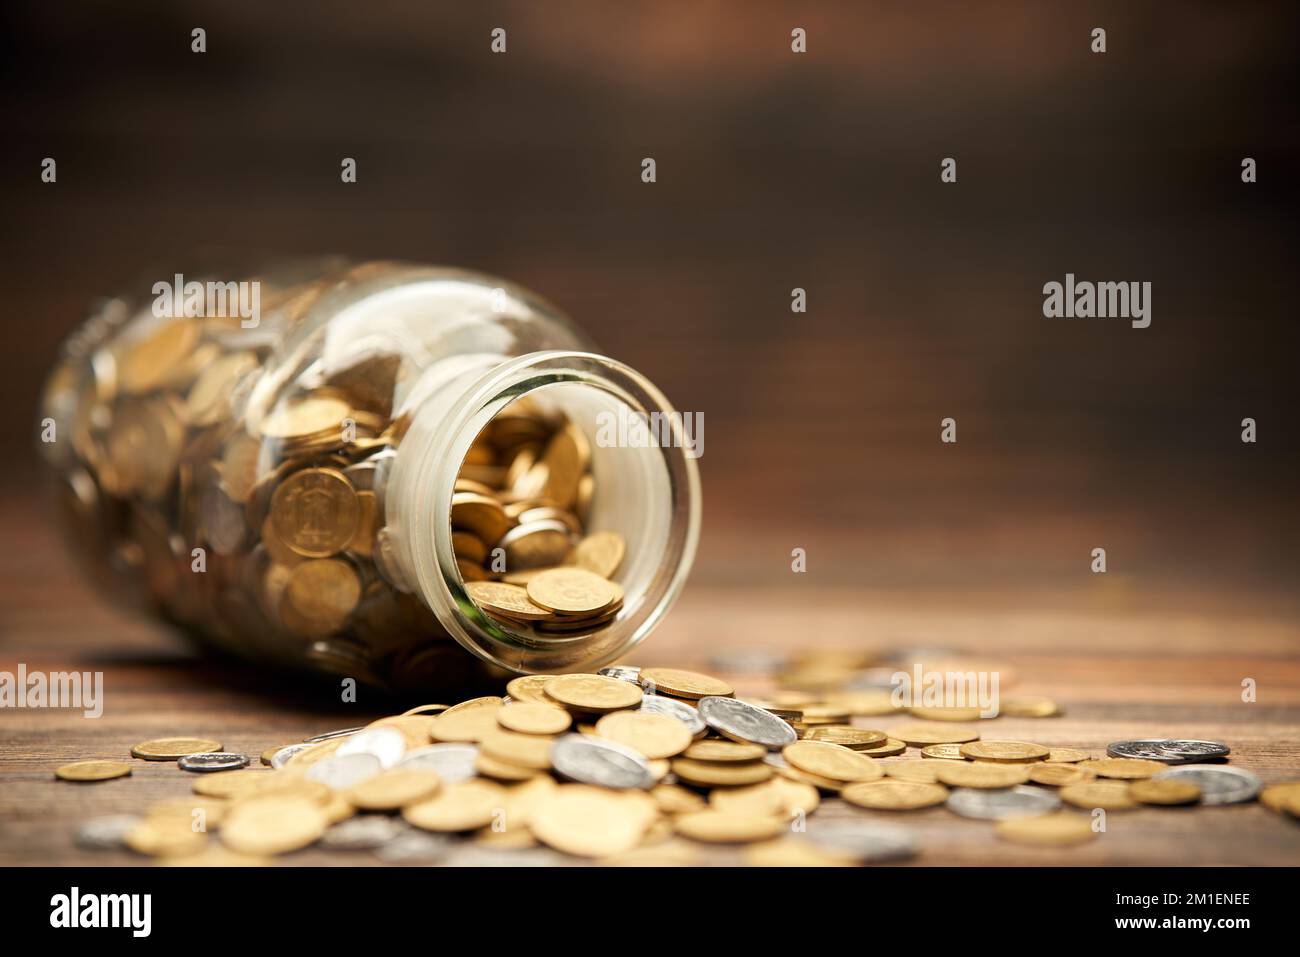 Glass jar filled of golden coins. Money, finance, retirement, investment concept Stock Photo